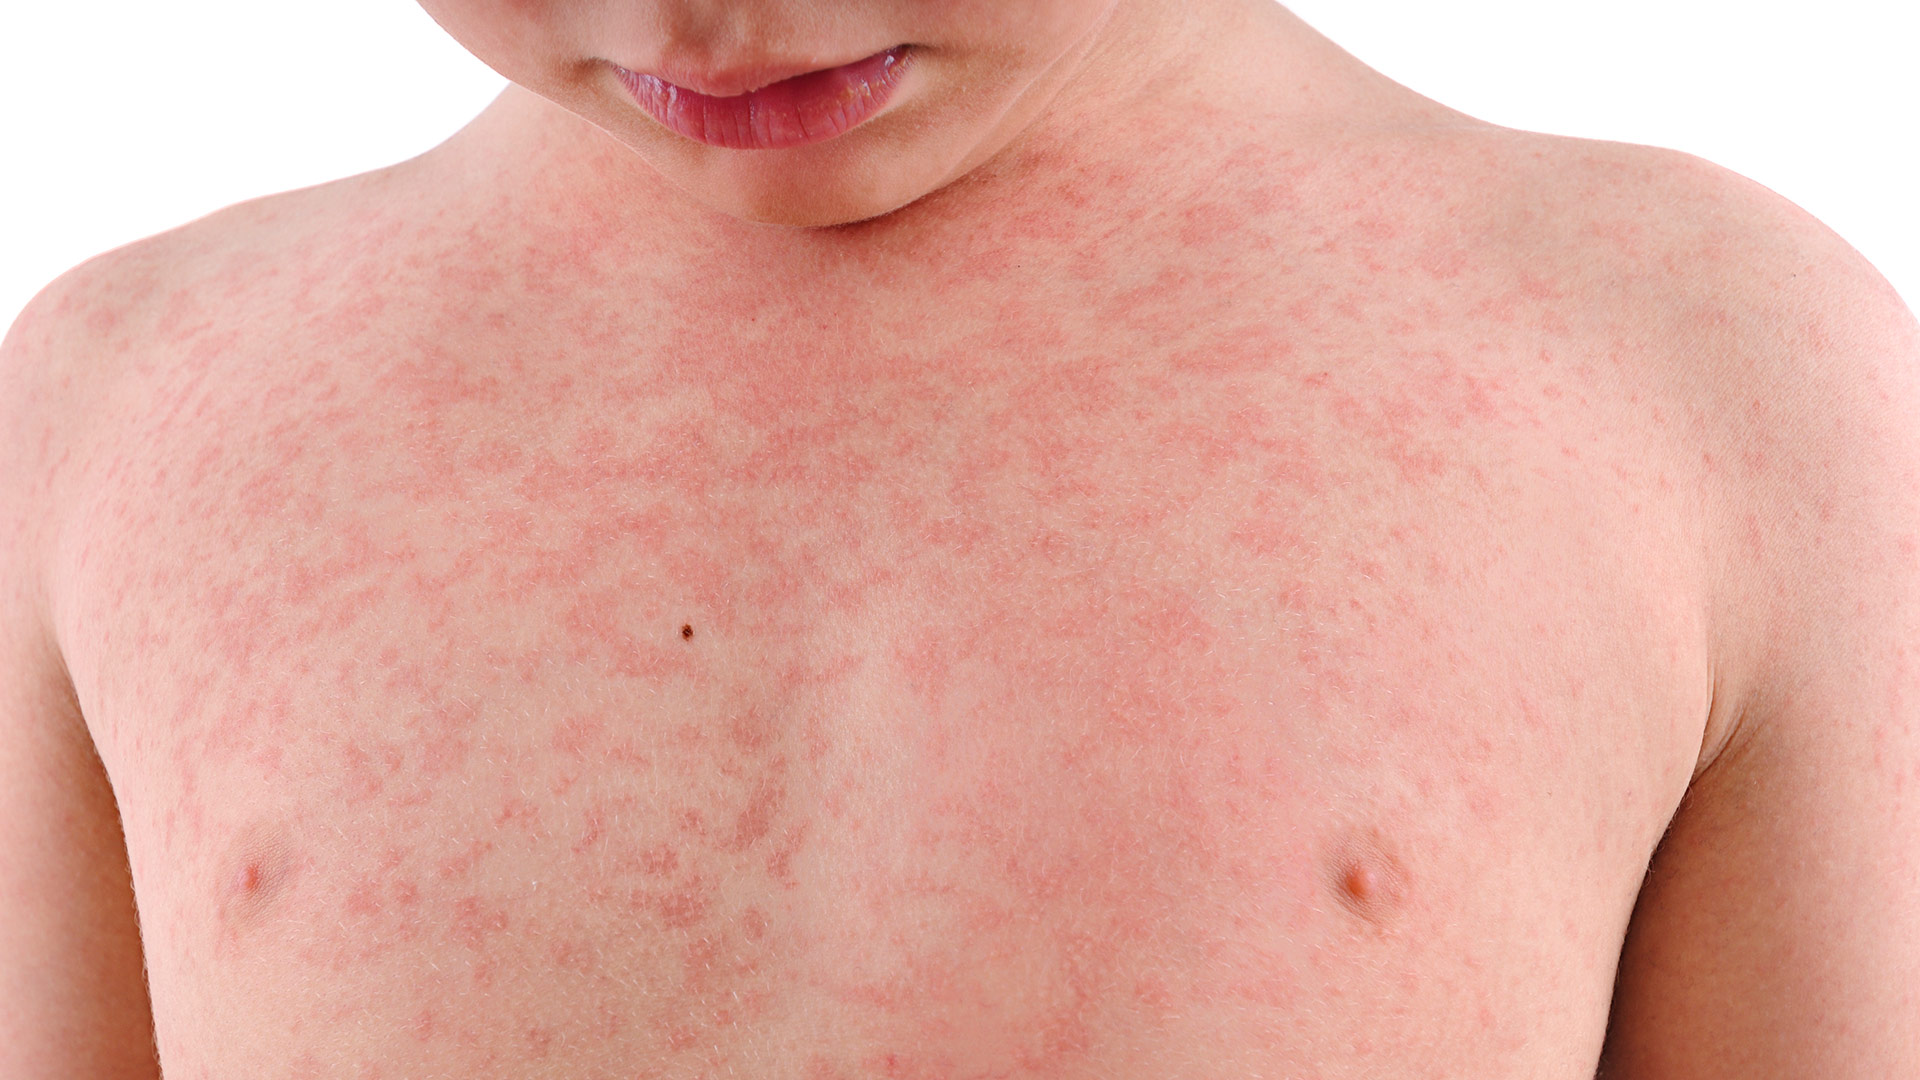 With more cases being reported regularly, we’re in the midst of the worst measles outbreak since 1994. We spoke to two Atrium Health pediatricians about the precautions parents should take.